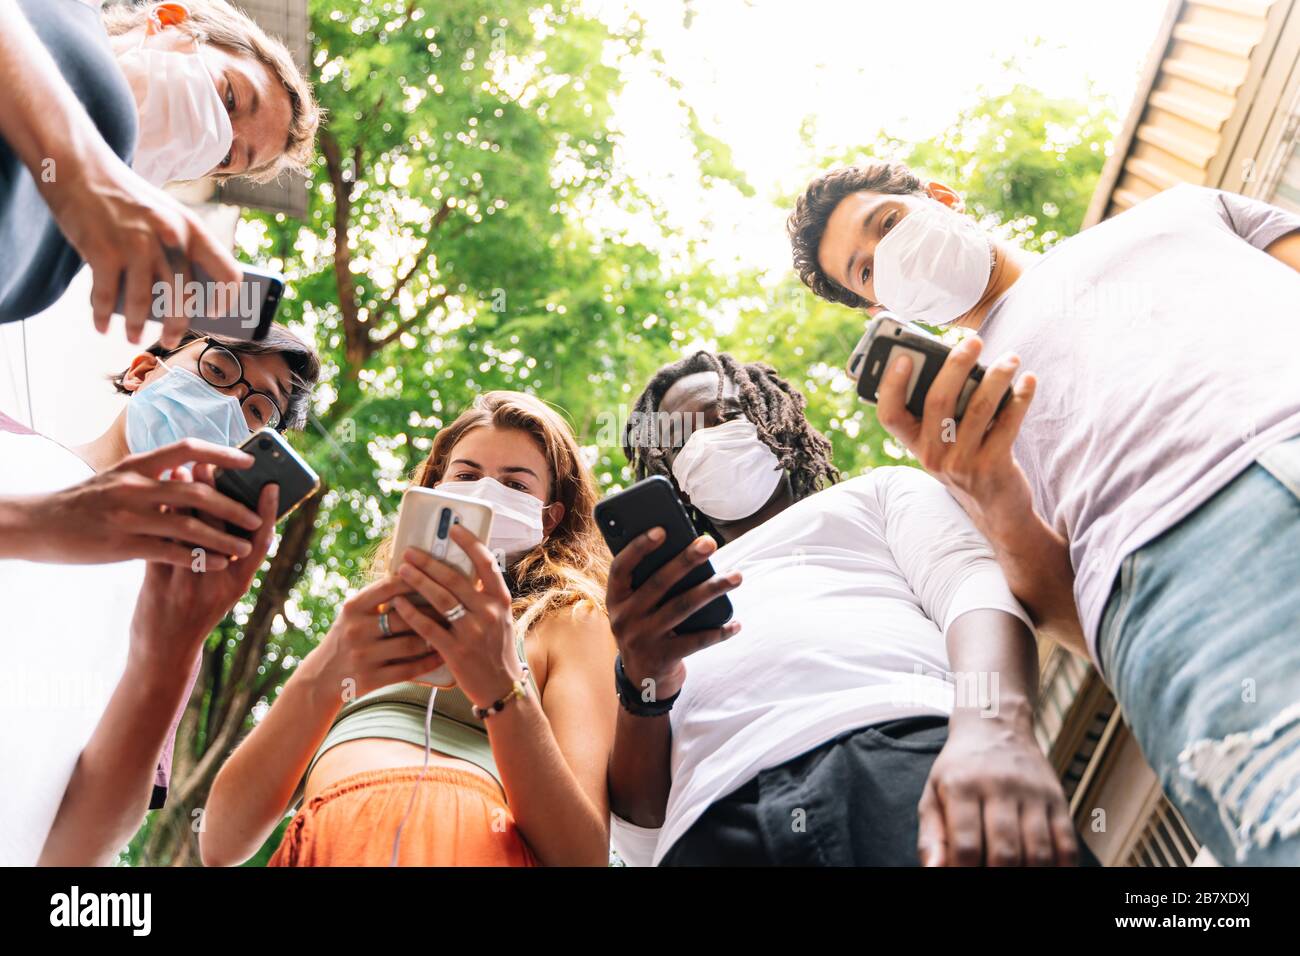 Group of young people of different ethnicities standing together with a mobile phone in hand wearing protective masks on the street Stock Photo